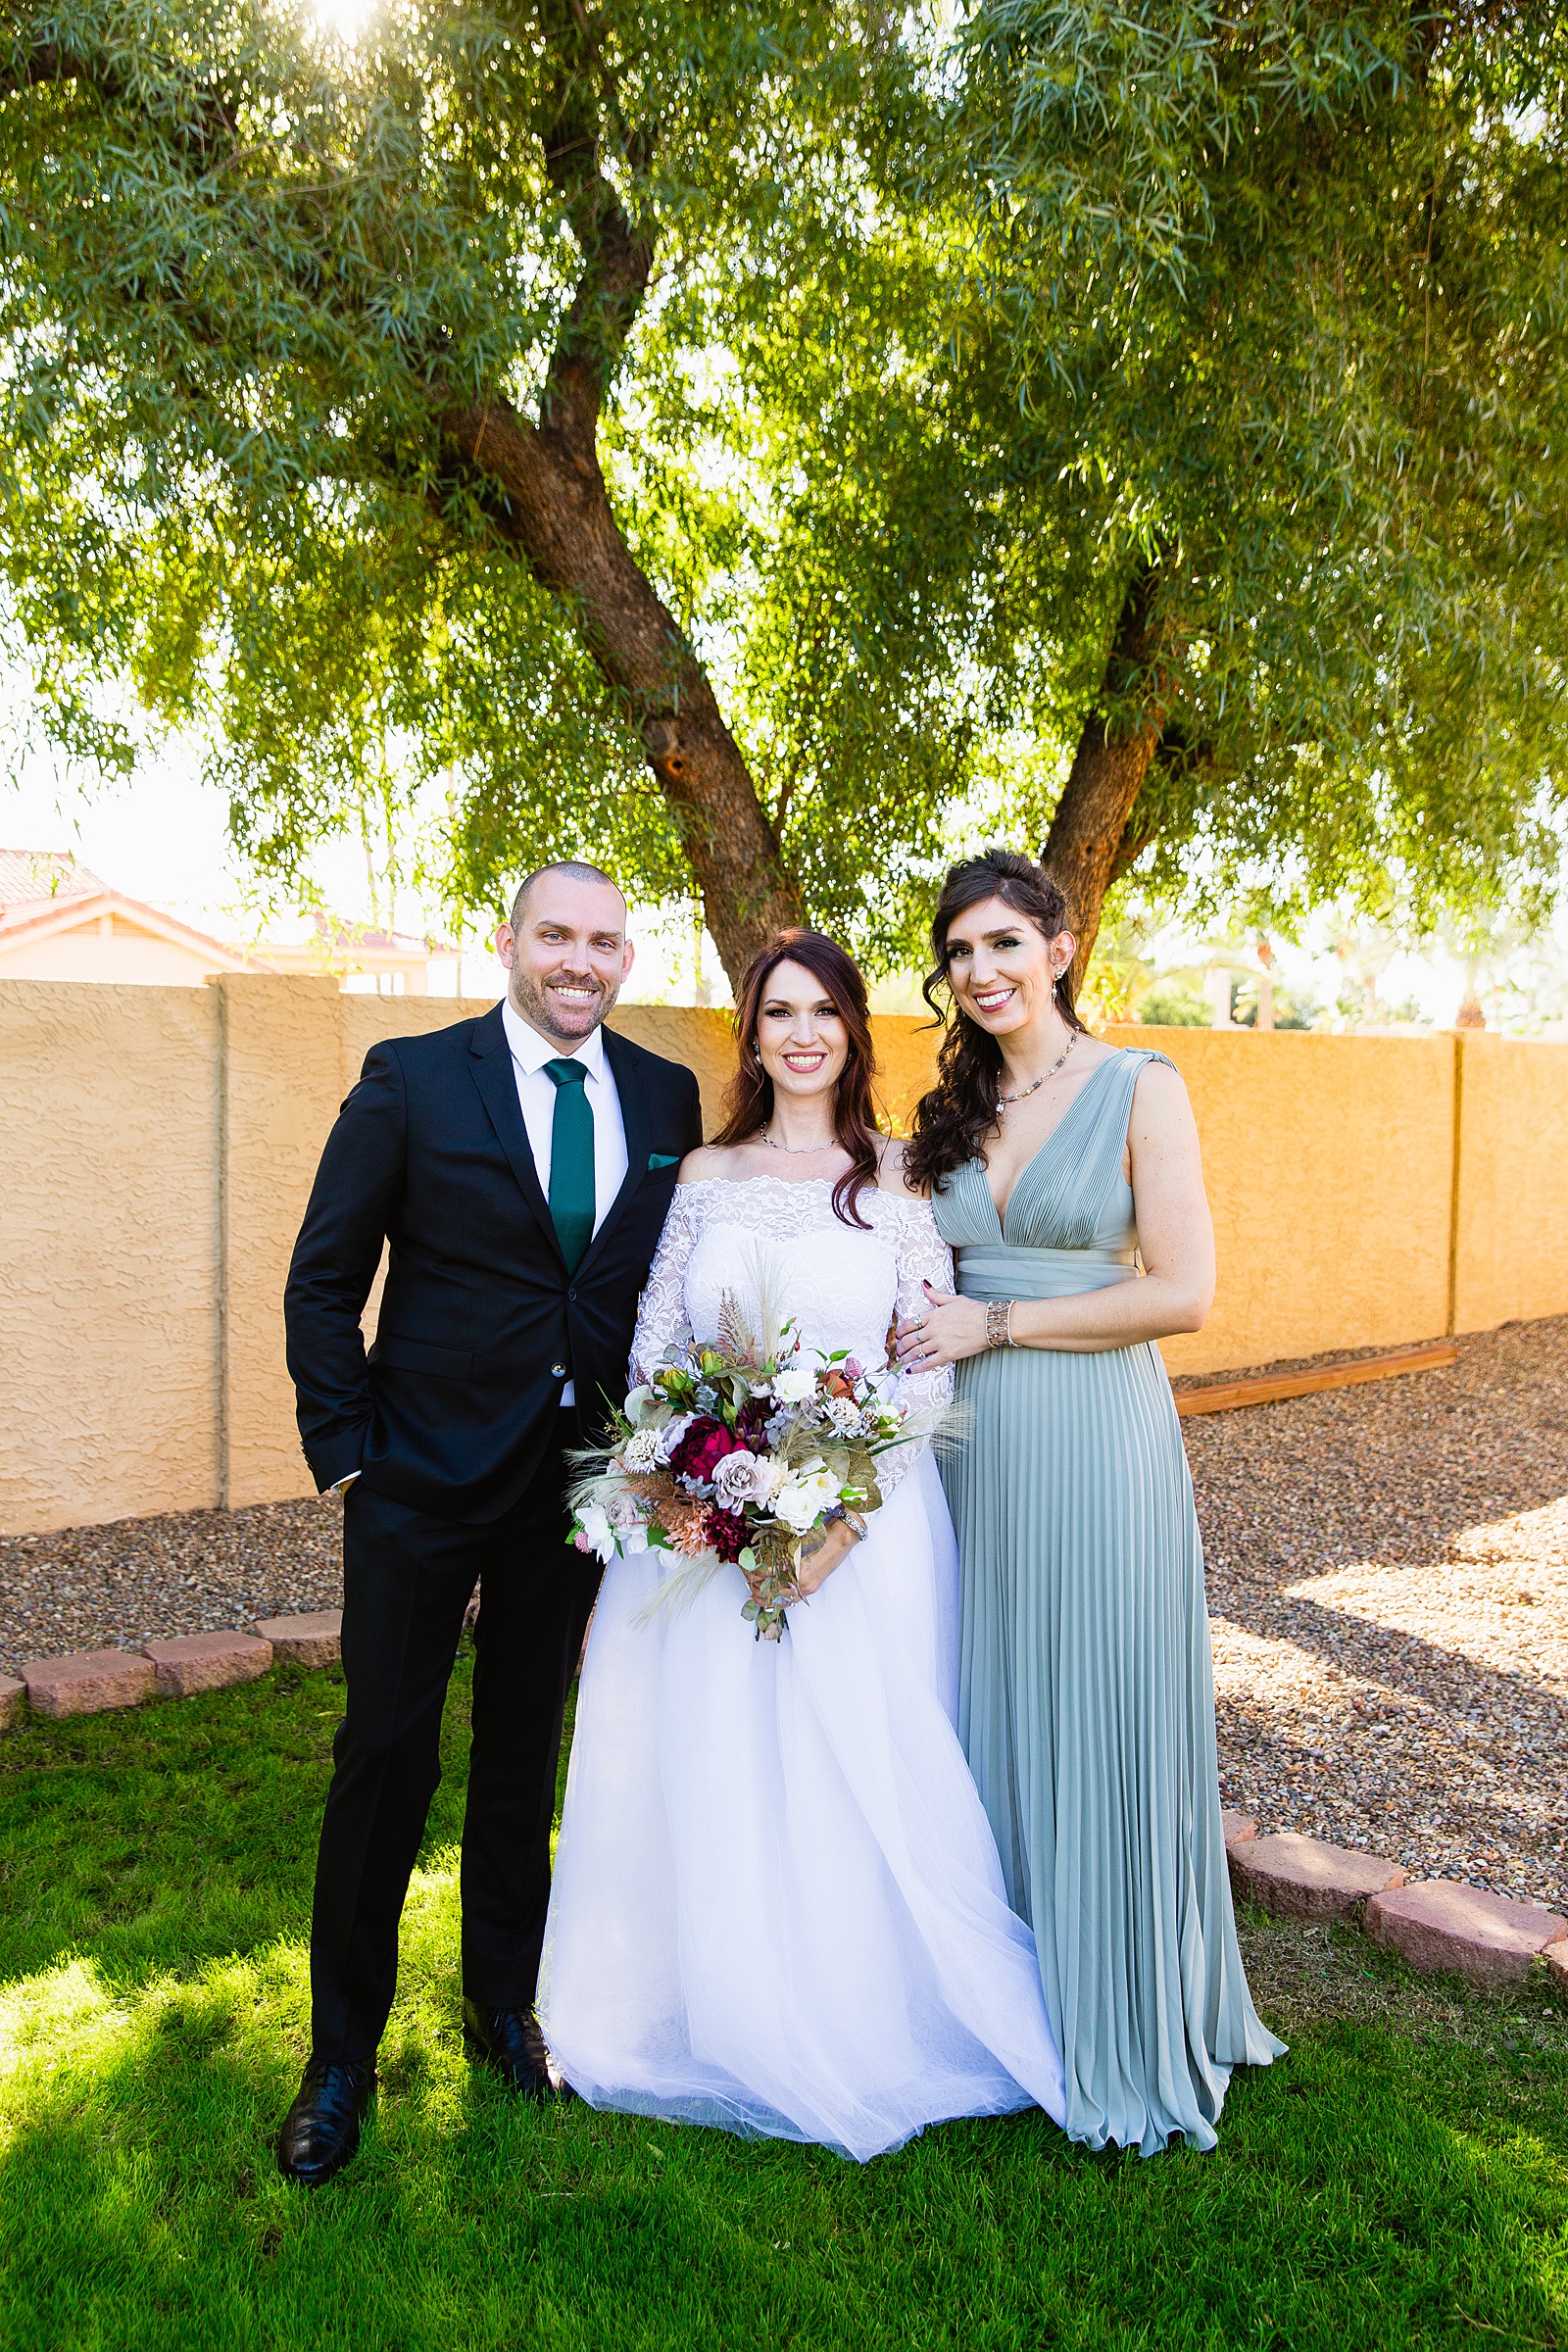 Bride and mixed gender bridal party together at a Backyard Micro wedding by Arizona wedding photographer PMA Photography.